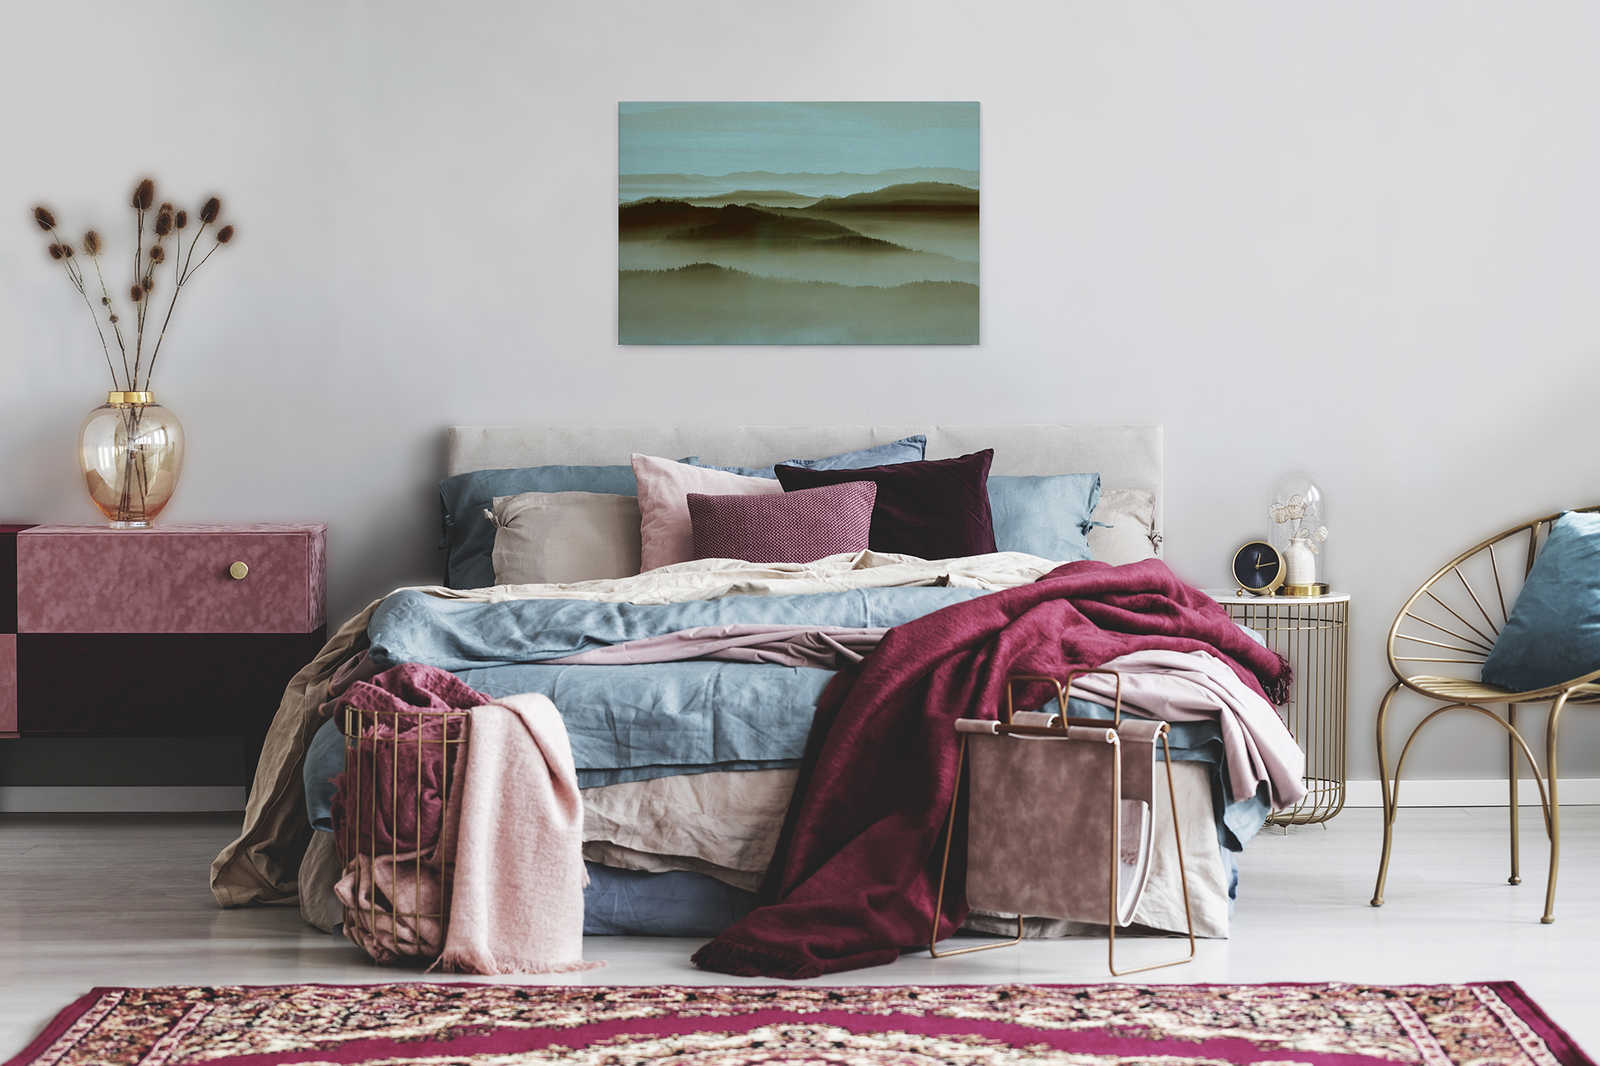             Horizon 2 - Canvas painting in cardboard structure with fog landscape, nature Sky Line - 0.90 m x 0.60 m
        